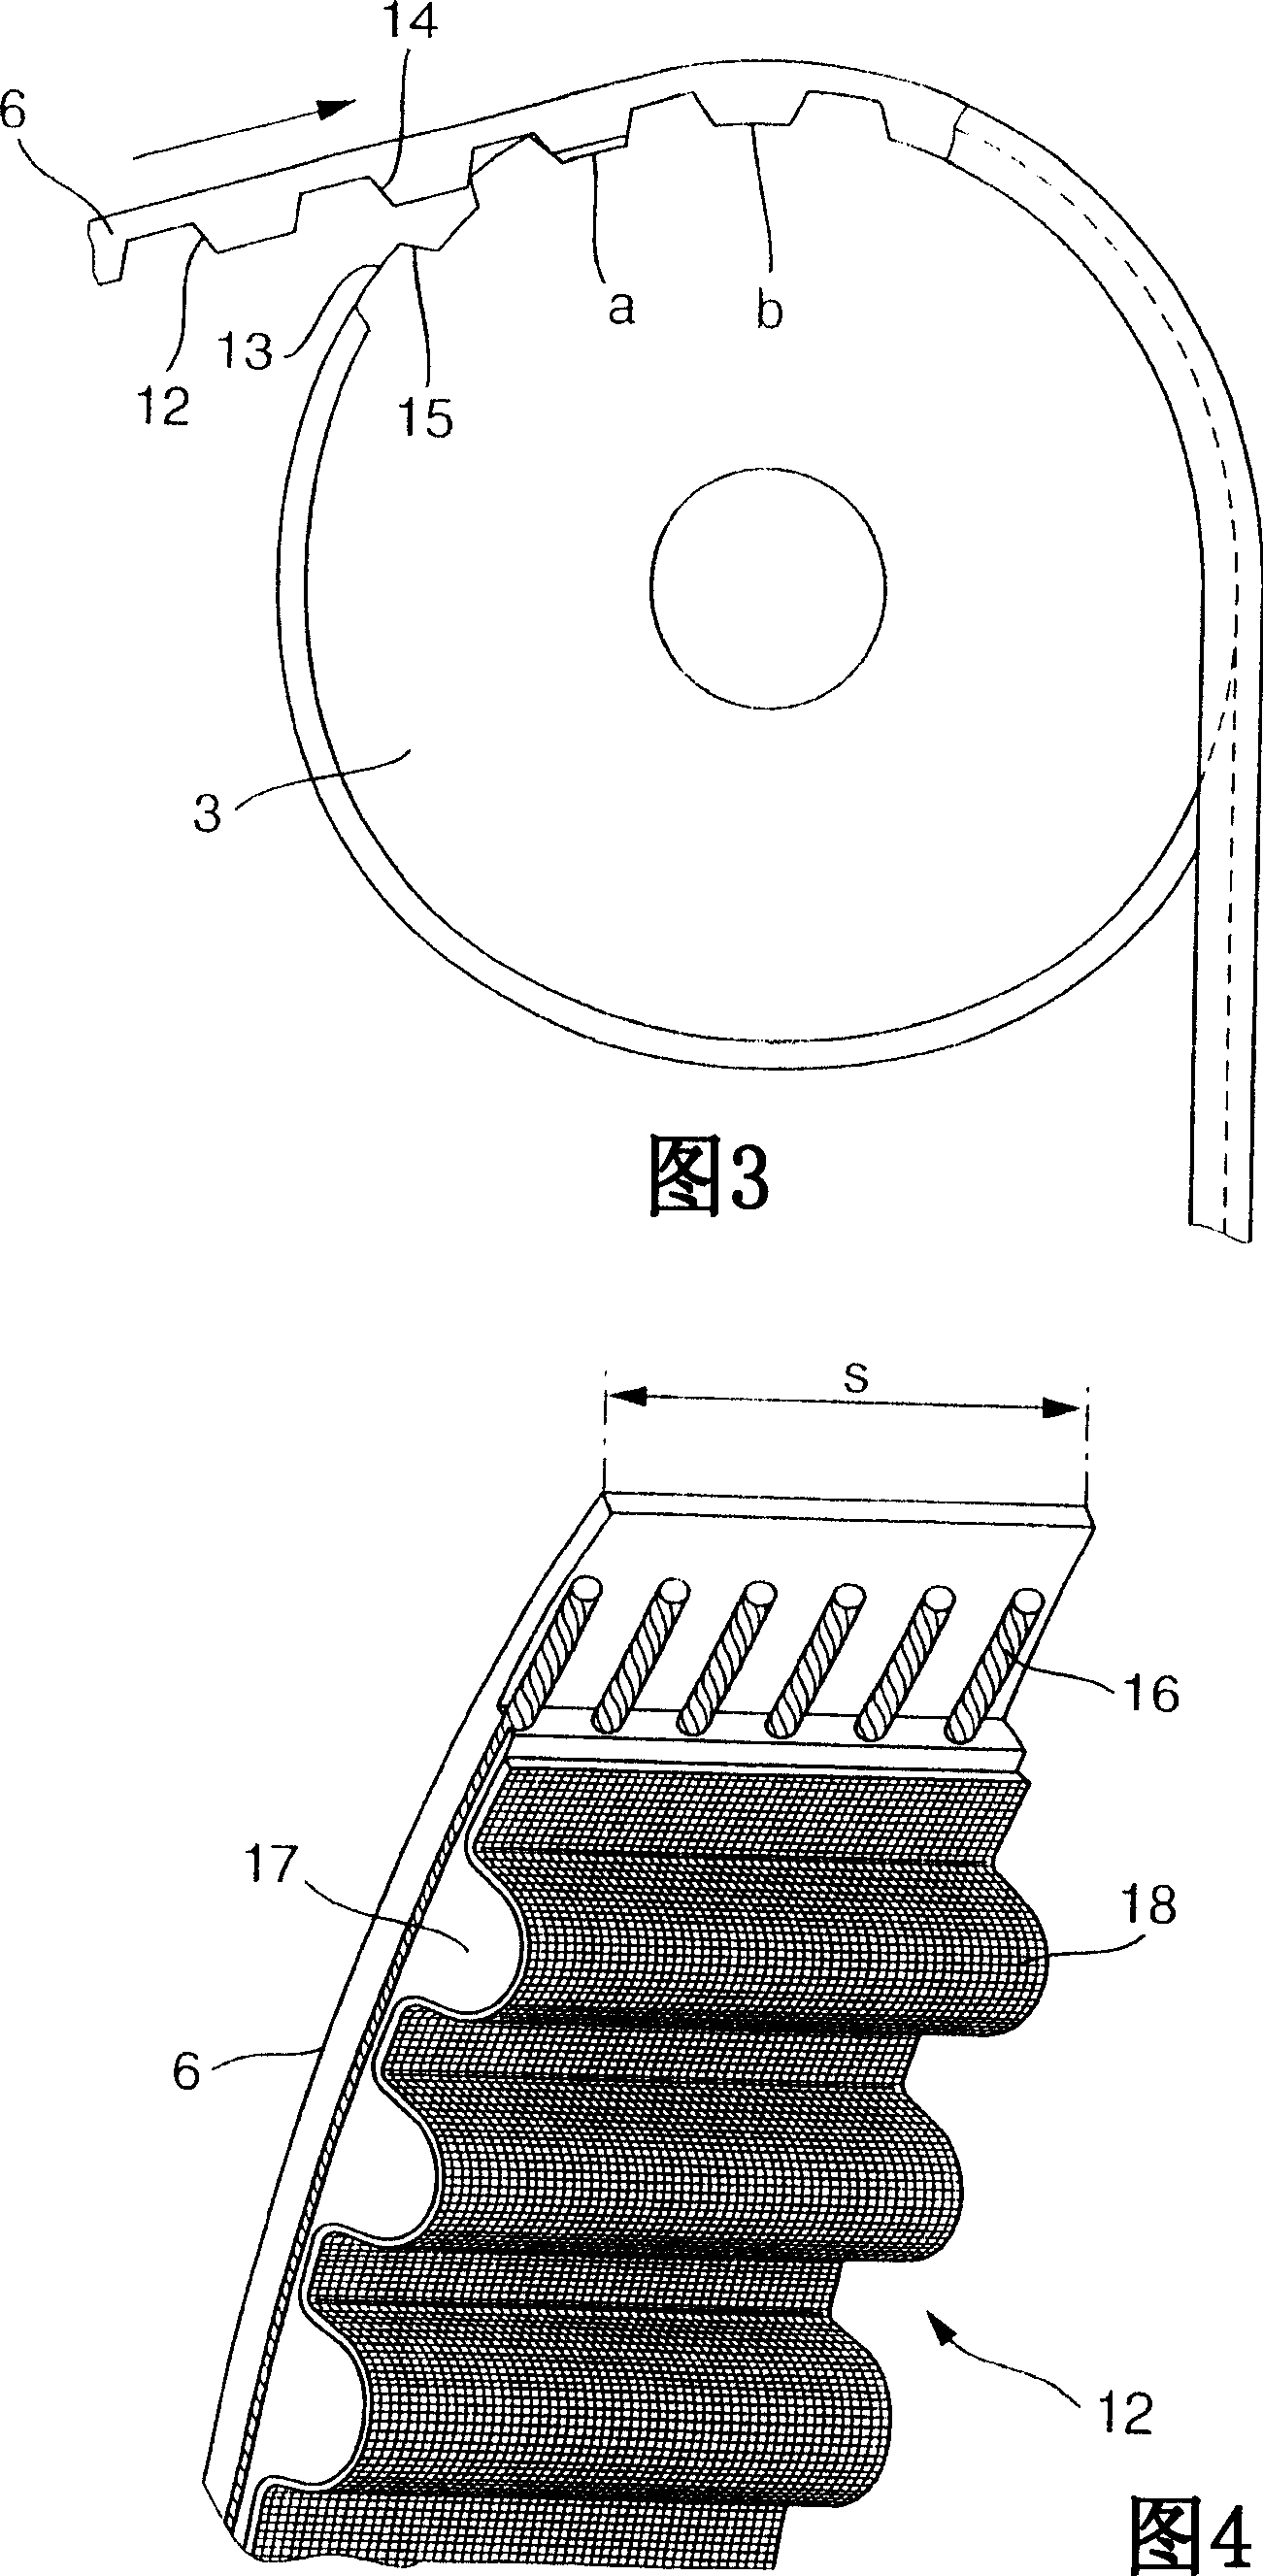 Cost-optimized traction mechanism